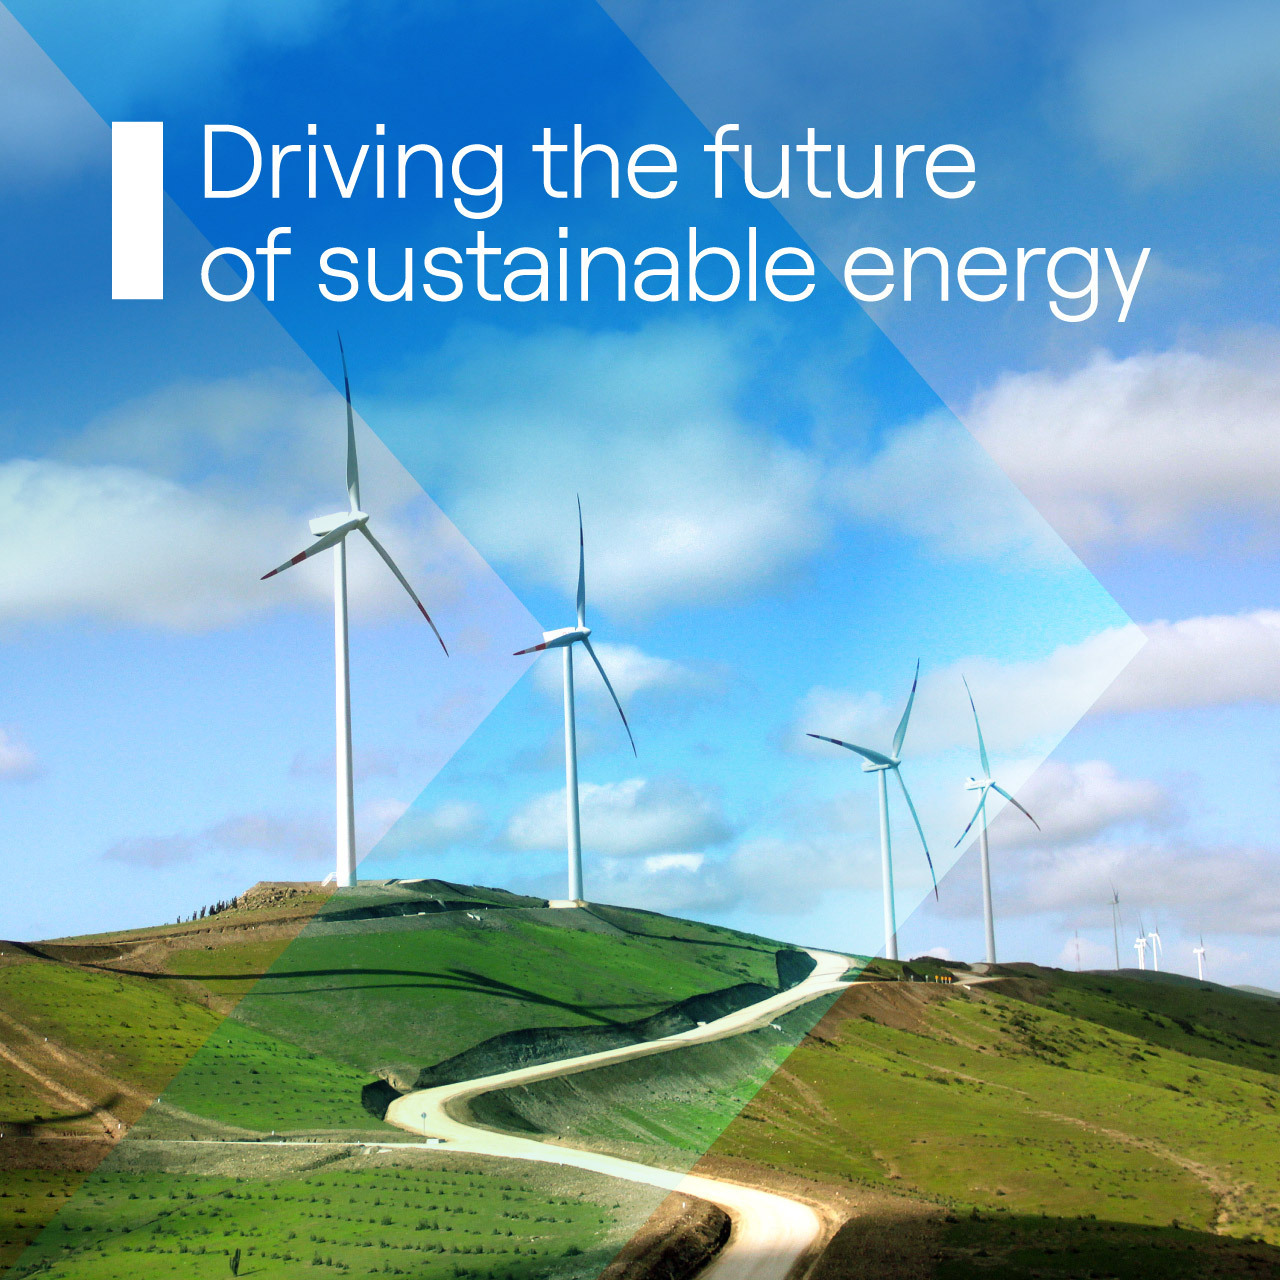 Driving the future of sustainable energy